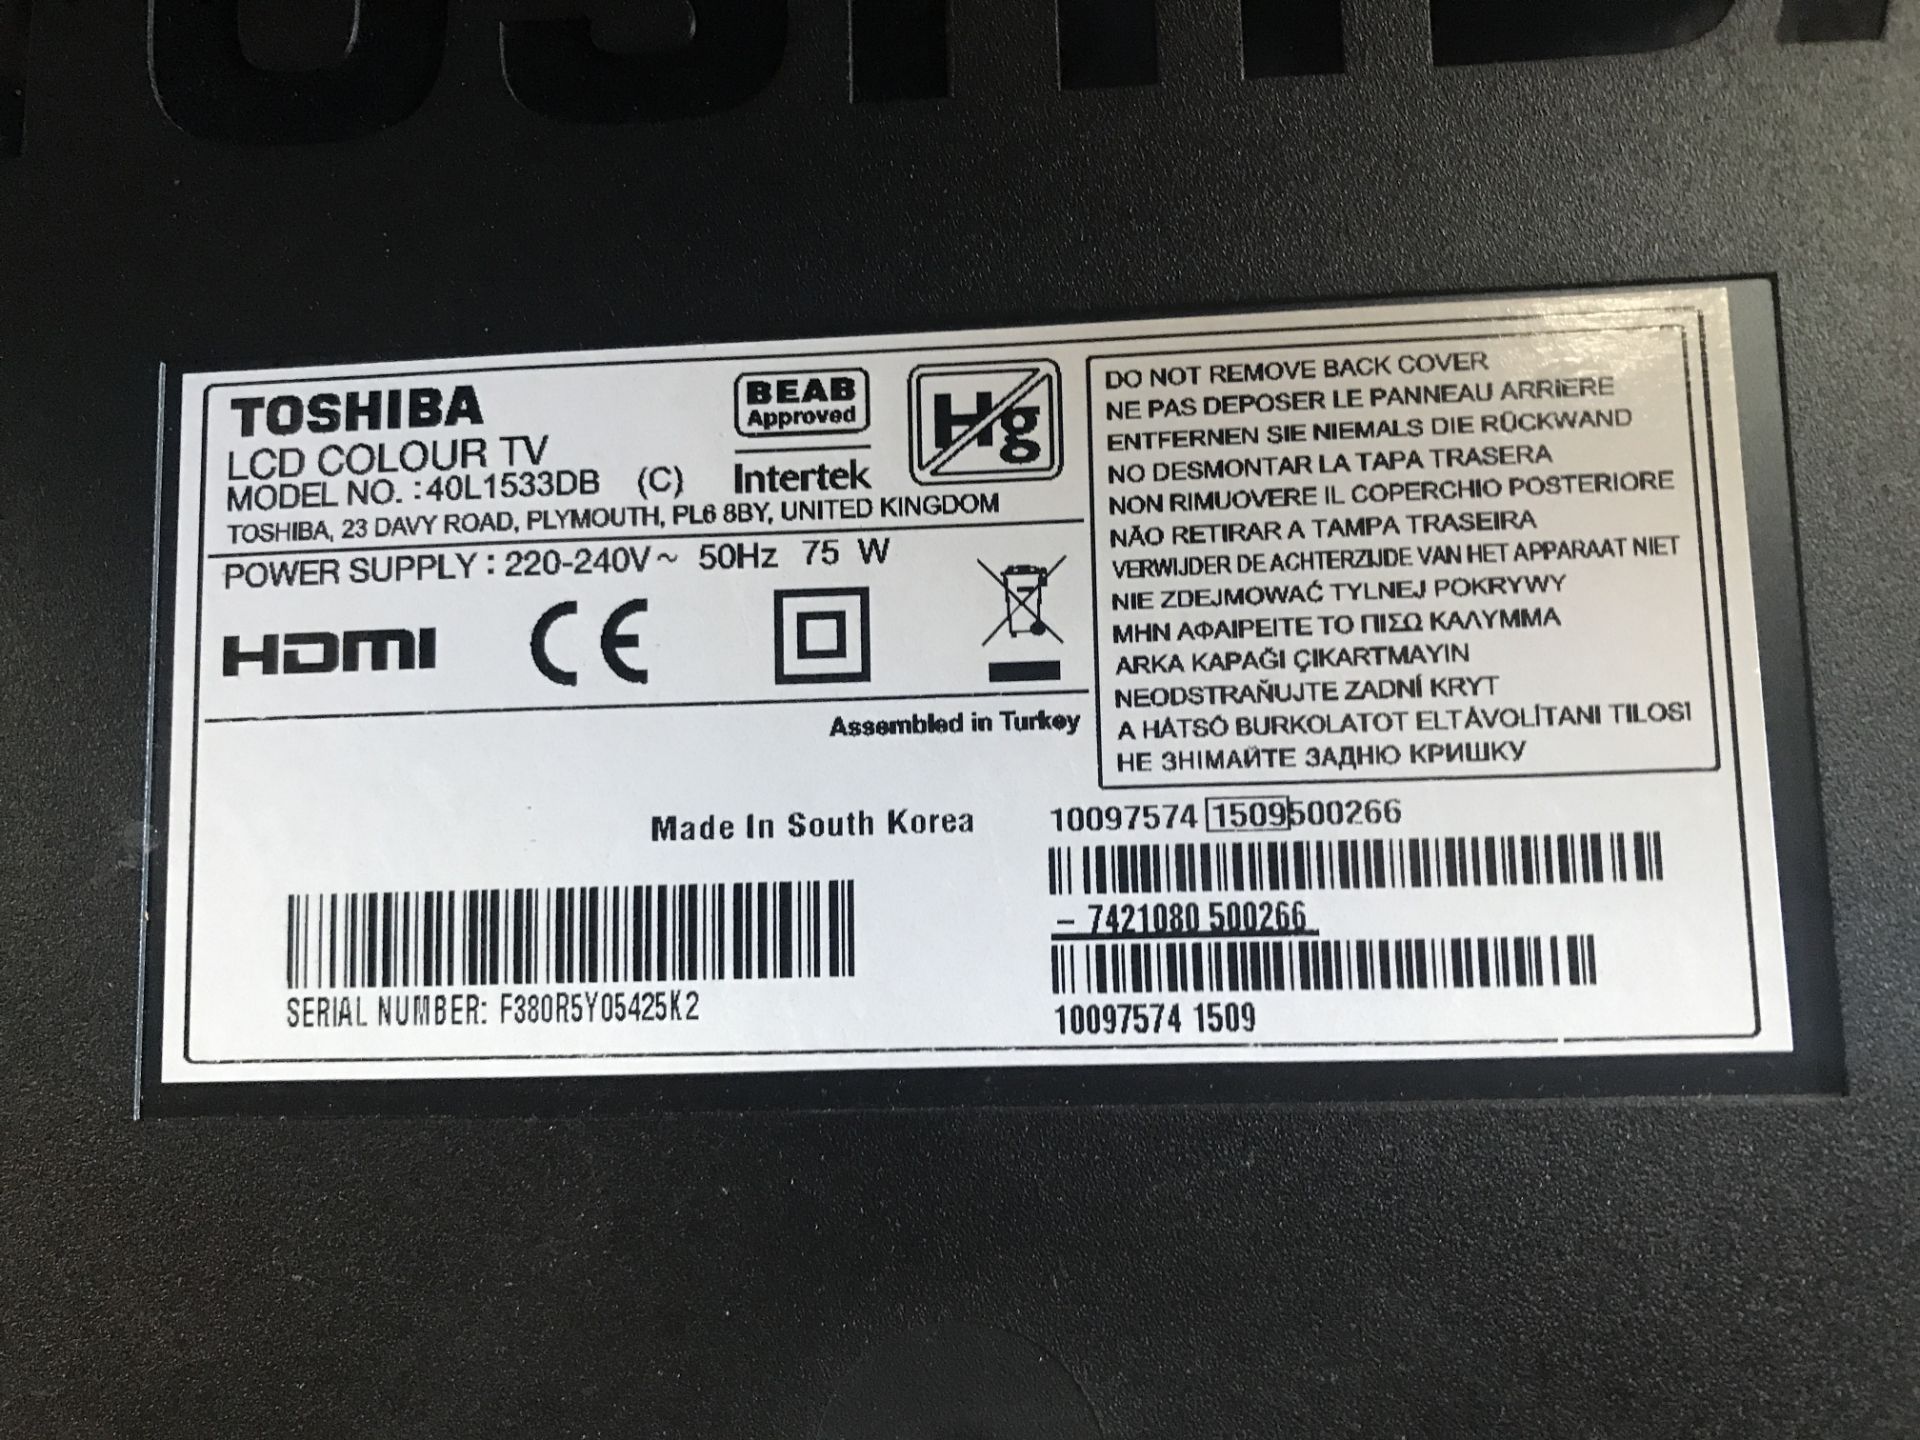 Toshiba Model 40L1533DB LCD Colour TV (Location: Brentwood. Please Refer to General Notes) - Image 2 of 2